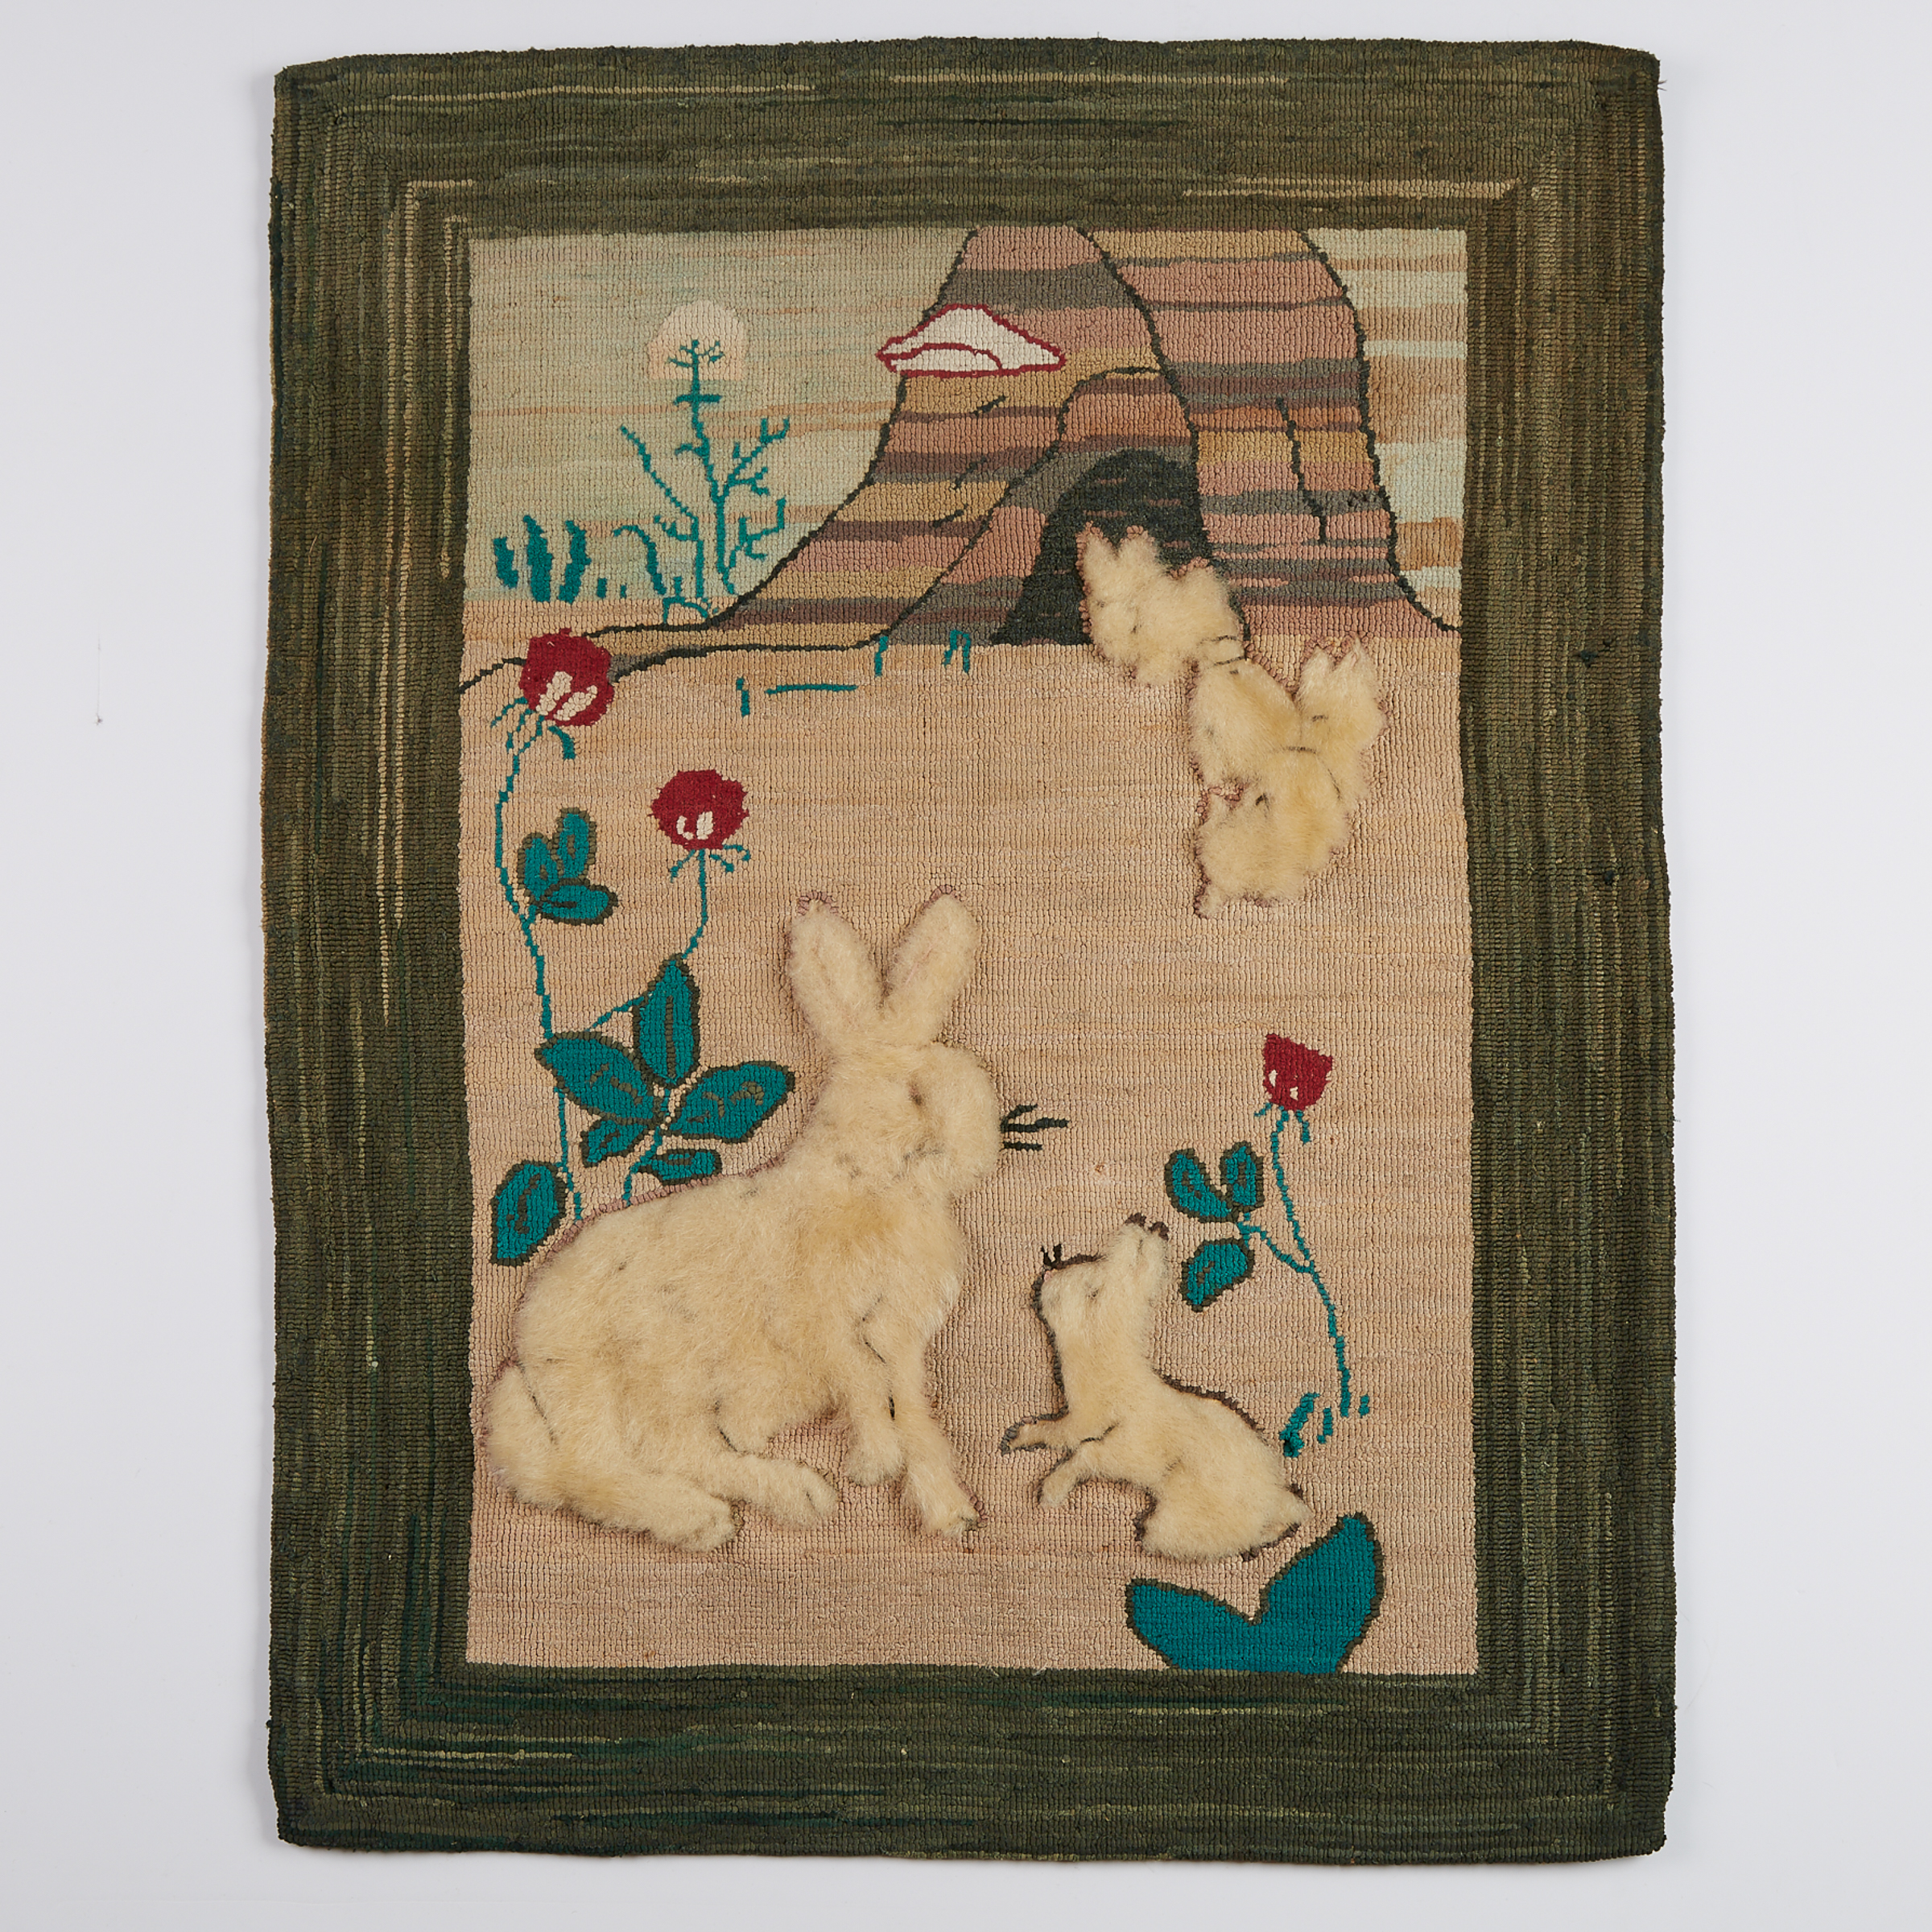 Grenfell Labrador Industries Rabbit and Poppies Hooked Mat, c.1930